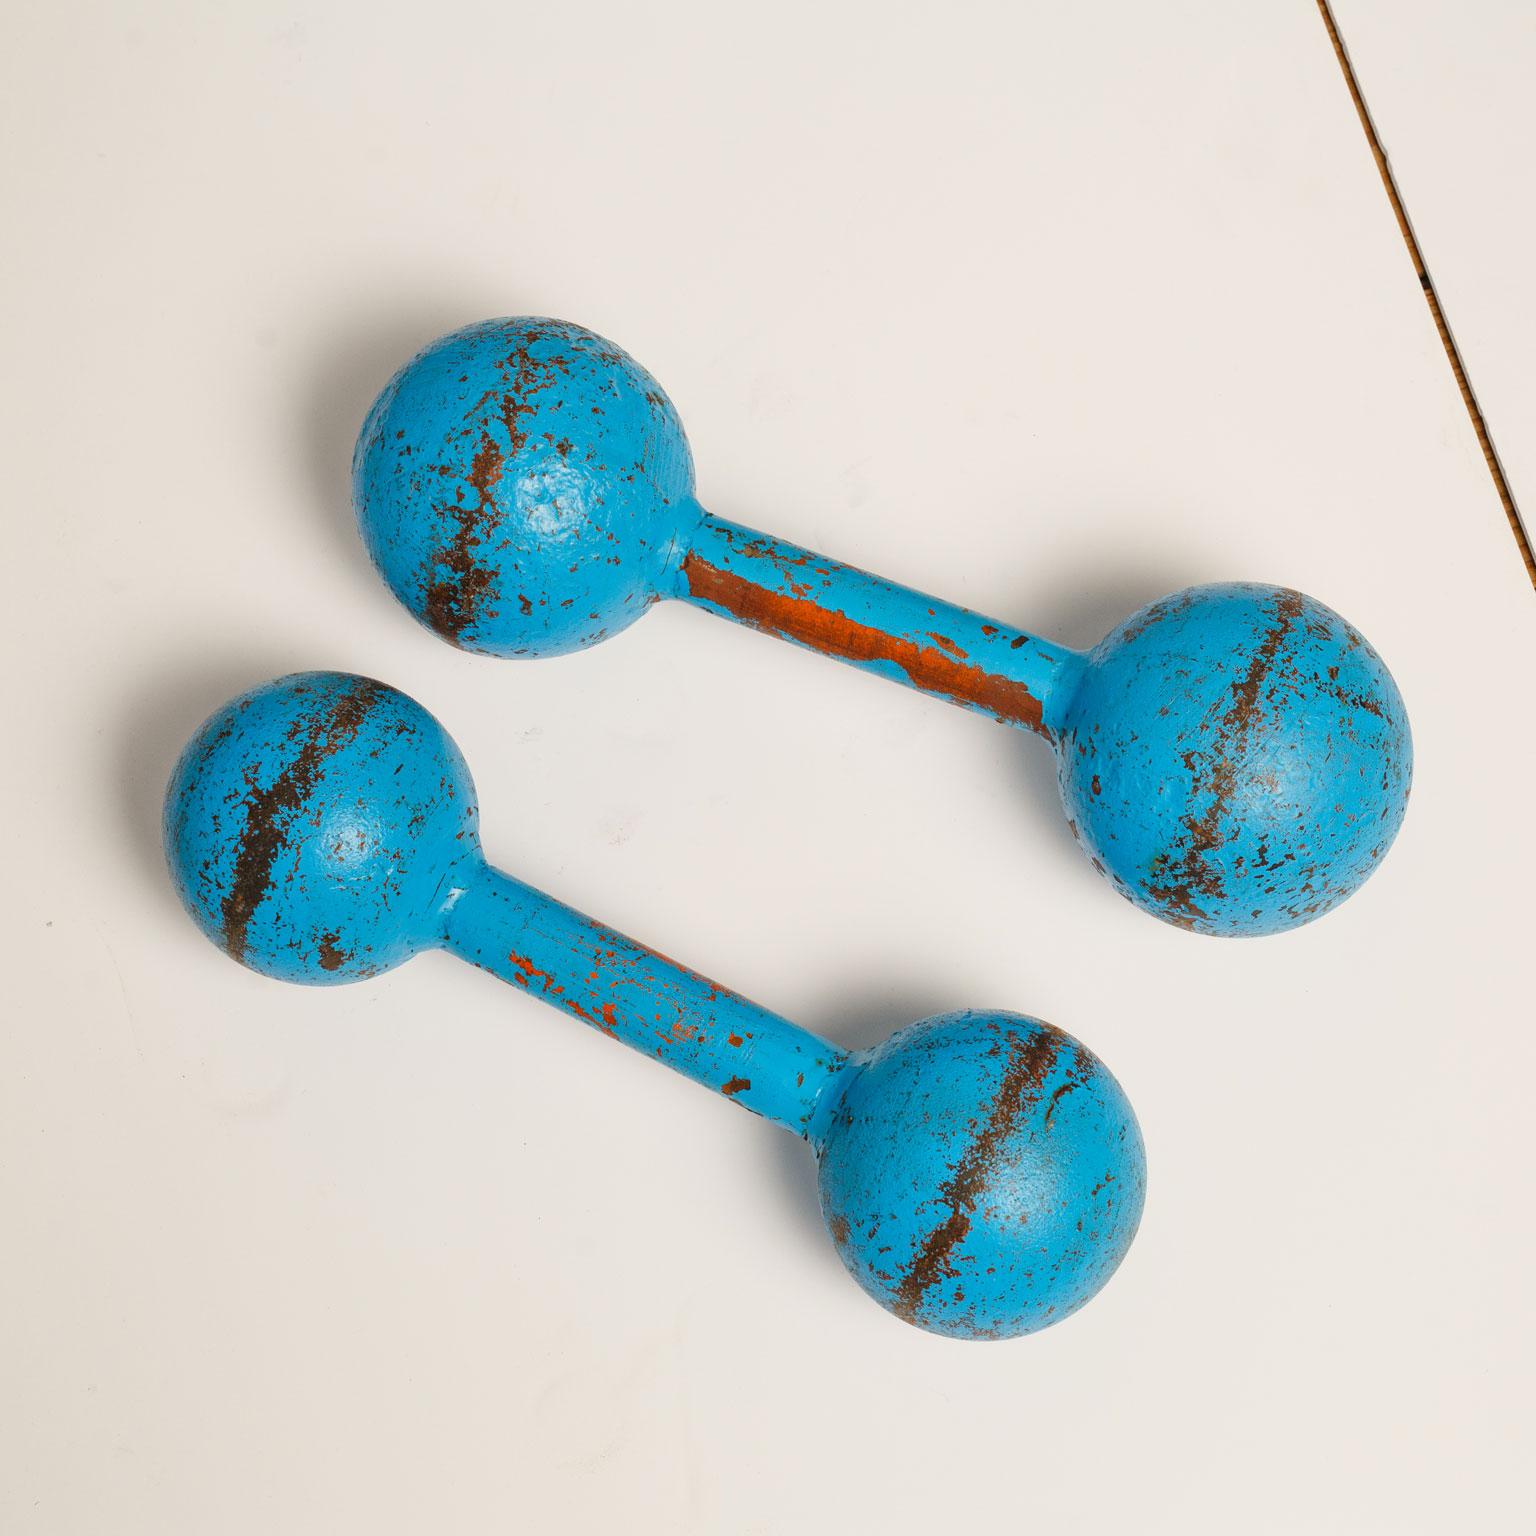 Pair of vintage iron barbells painted in cyan, or cerulean, blue. Hand-hammered with slight variations in size and proportion. Wonderfully decorative.

First barbell measures 4.75 inches high x 15.5 inches long x 4.75 deep.
Second barbell